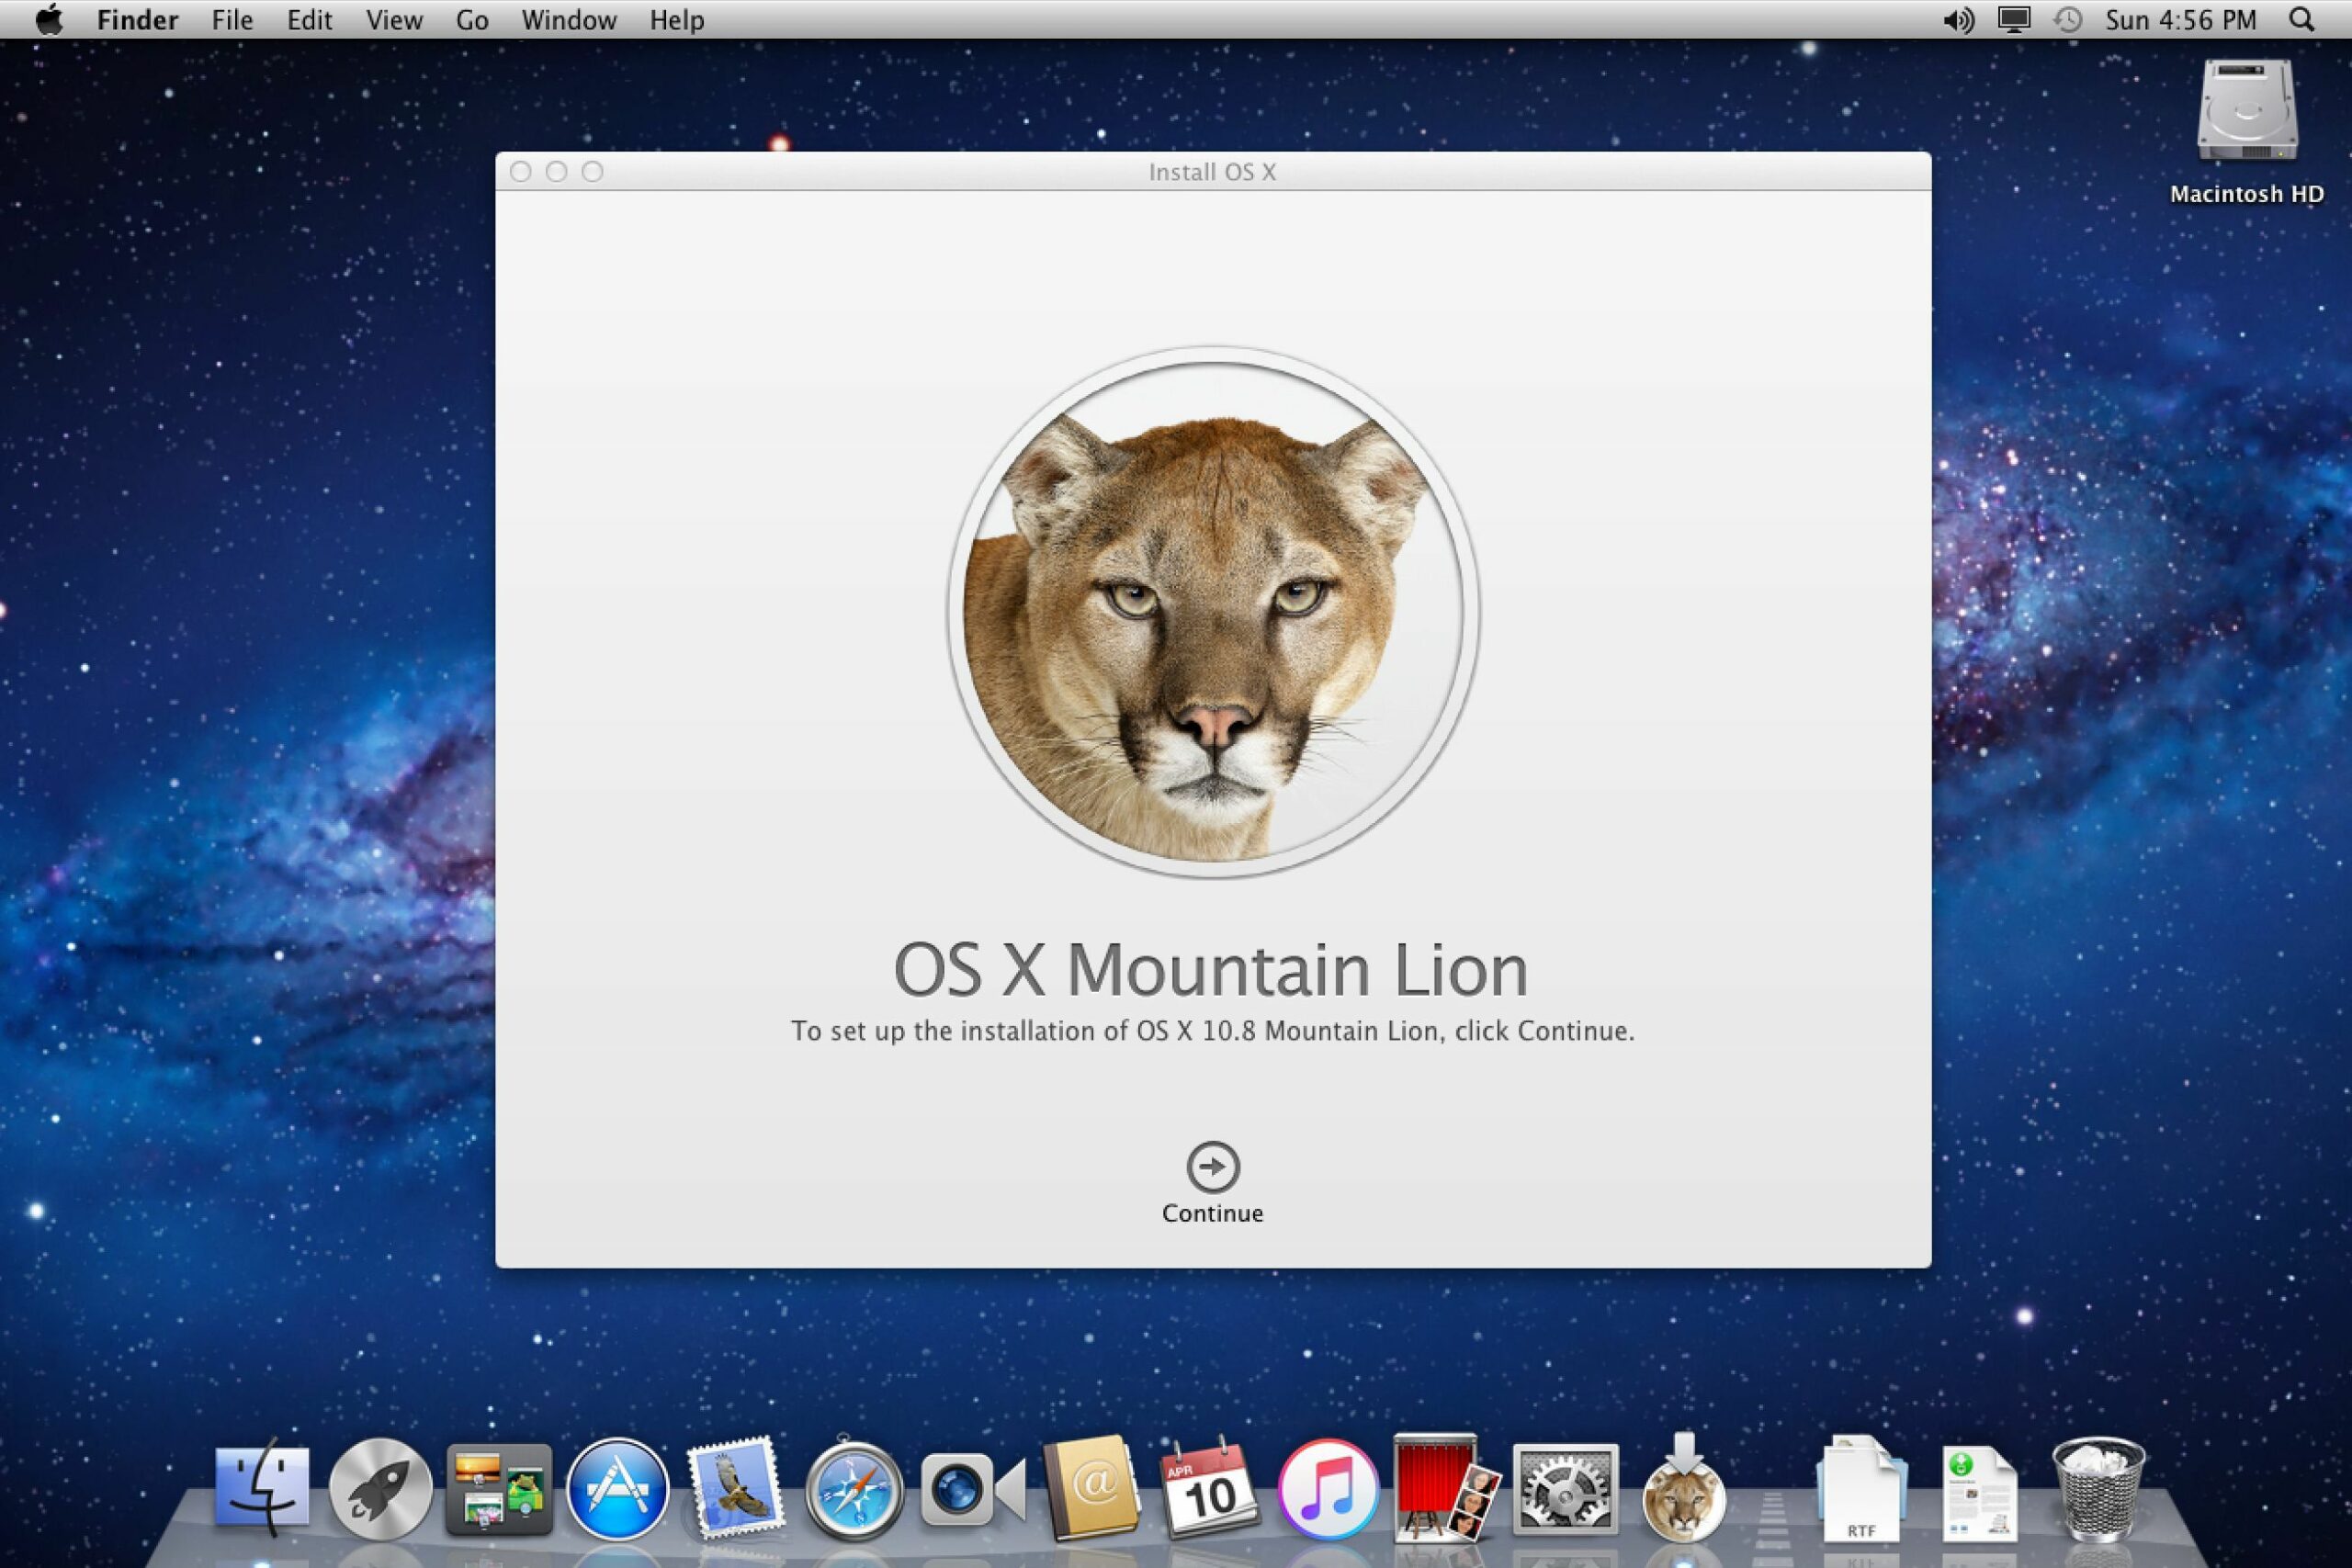 how to upgrade macmini from mac os x lion 10.7.5